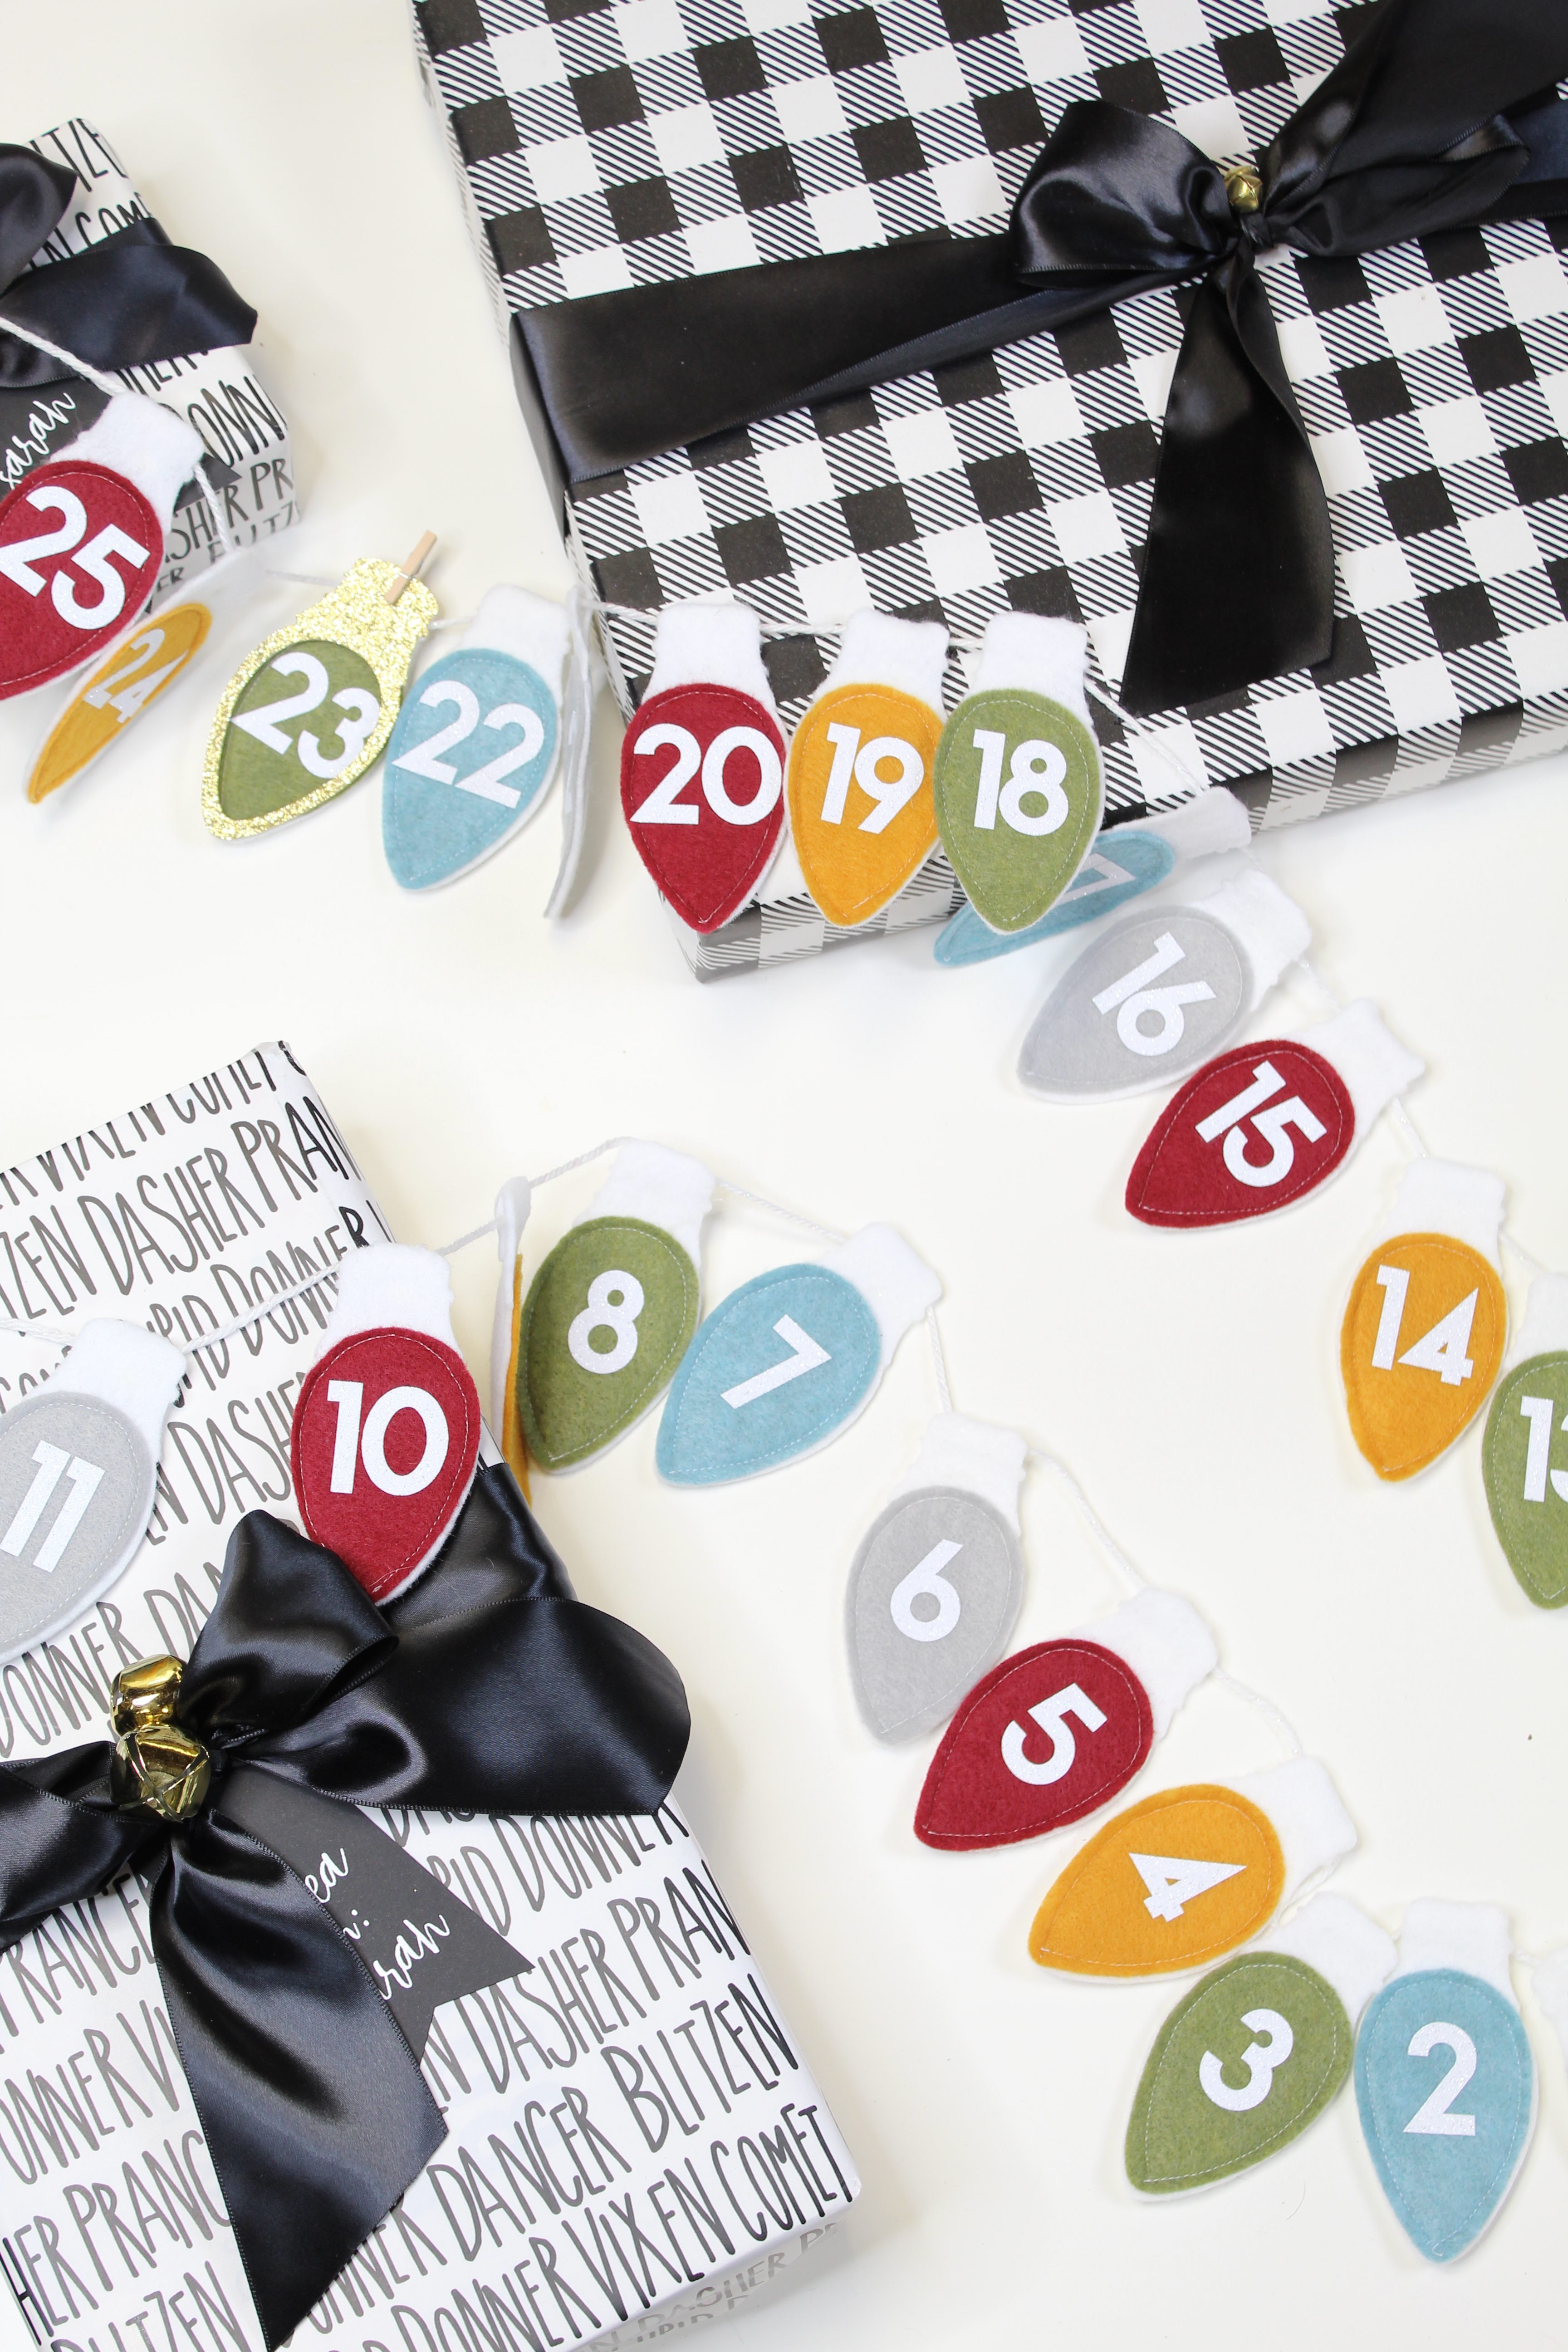 Get in the holiday spirit with this DIY felt advent banner!